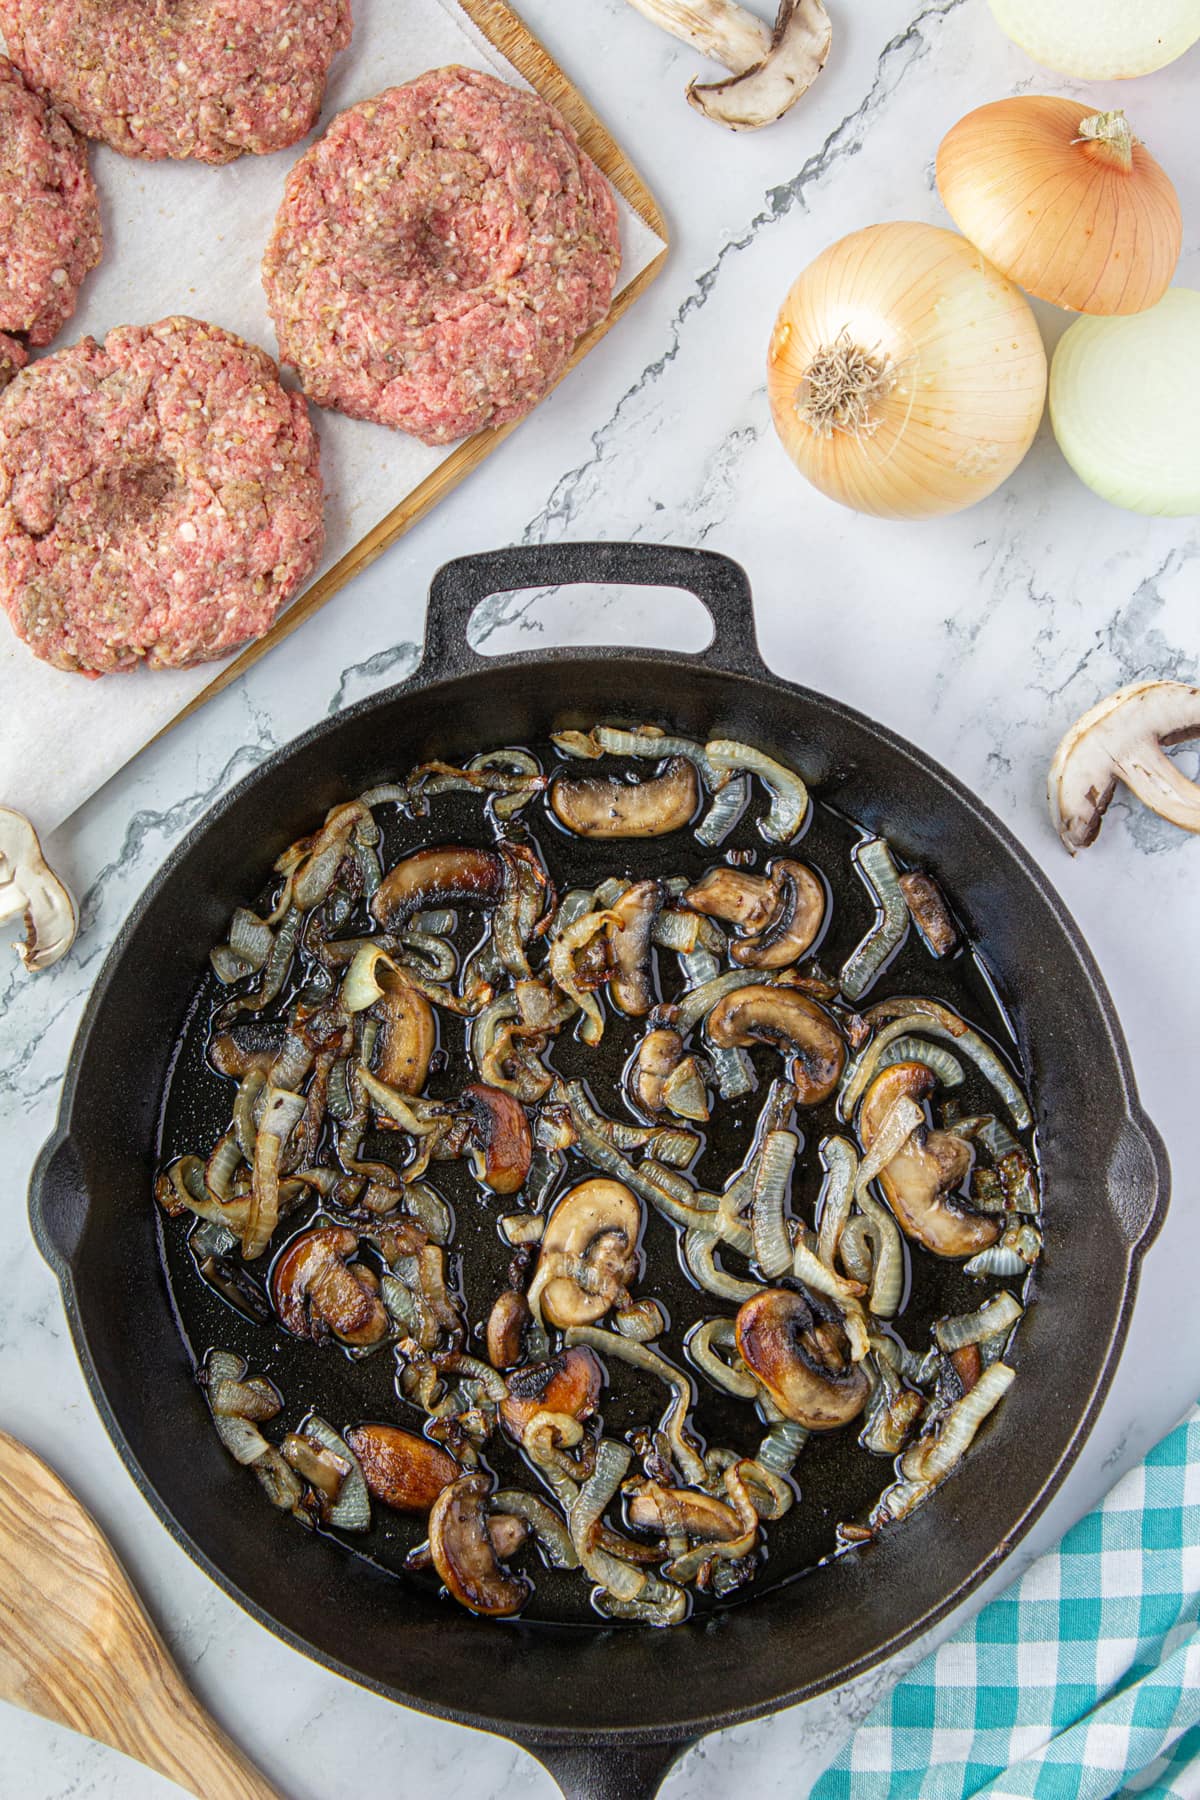 Sauteed mushrooms and onions in the bottom of a skillet.